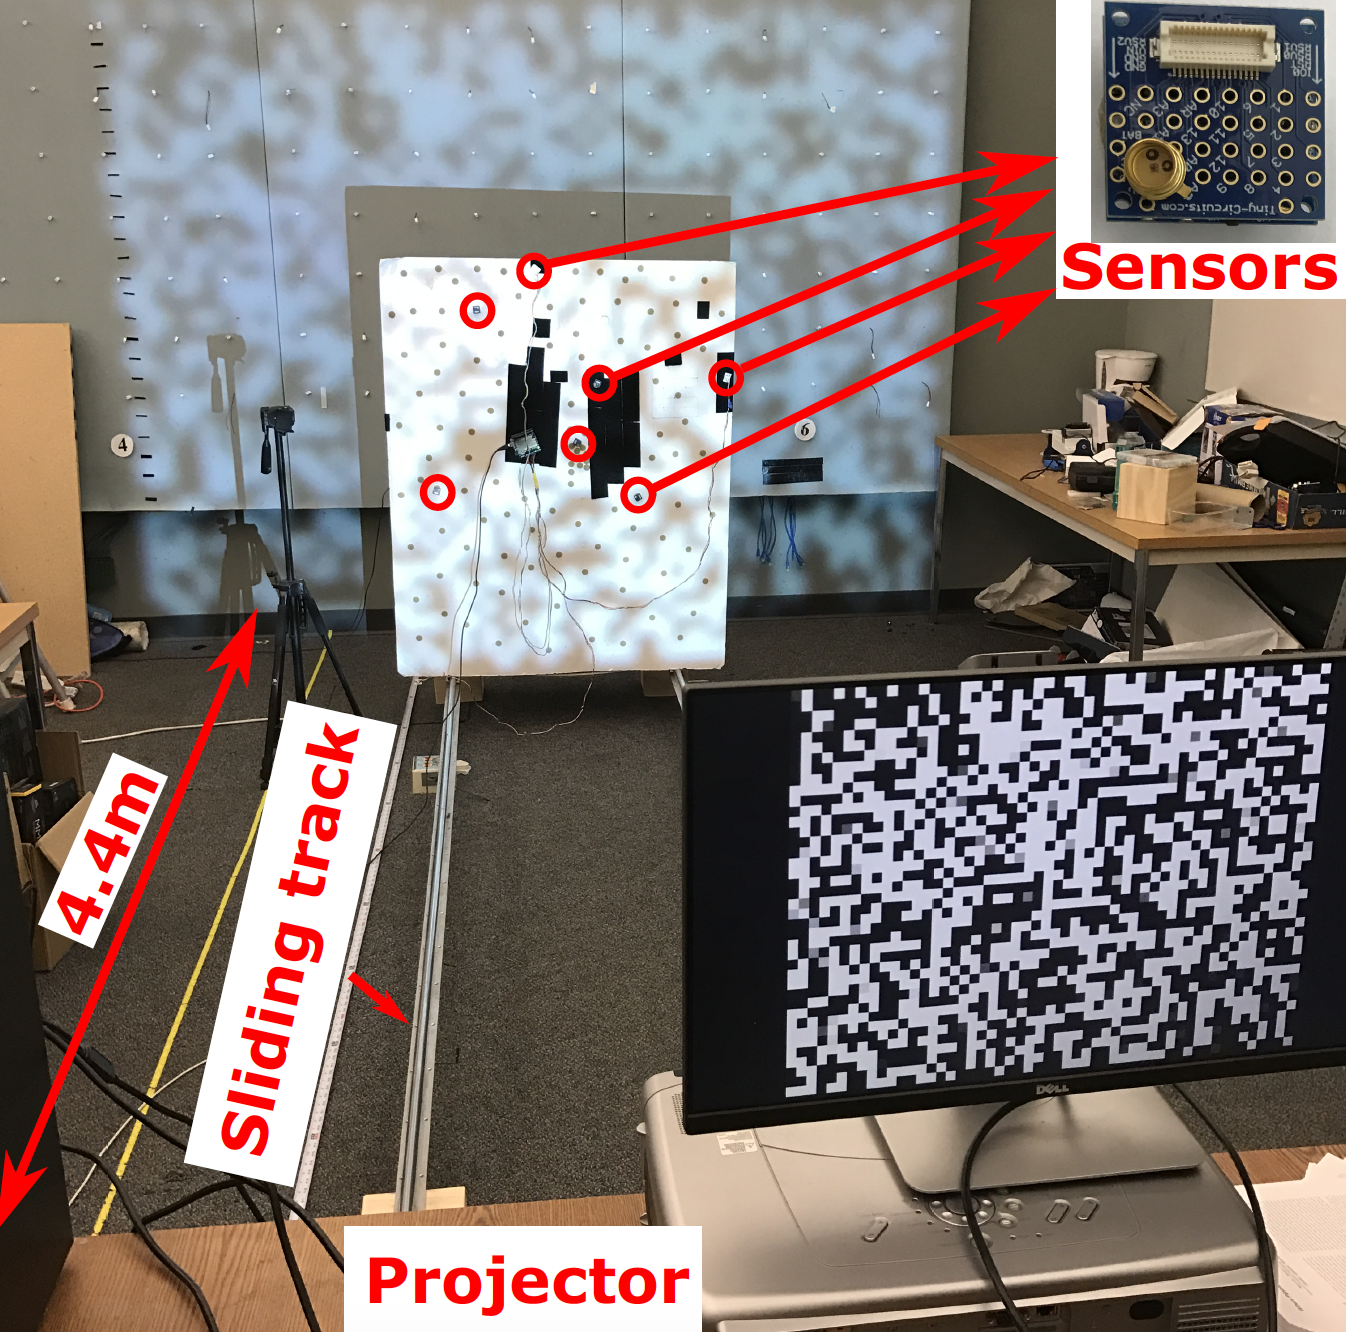 SmartLight testbed using a 60Hz projector